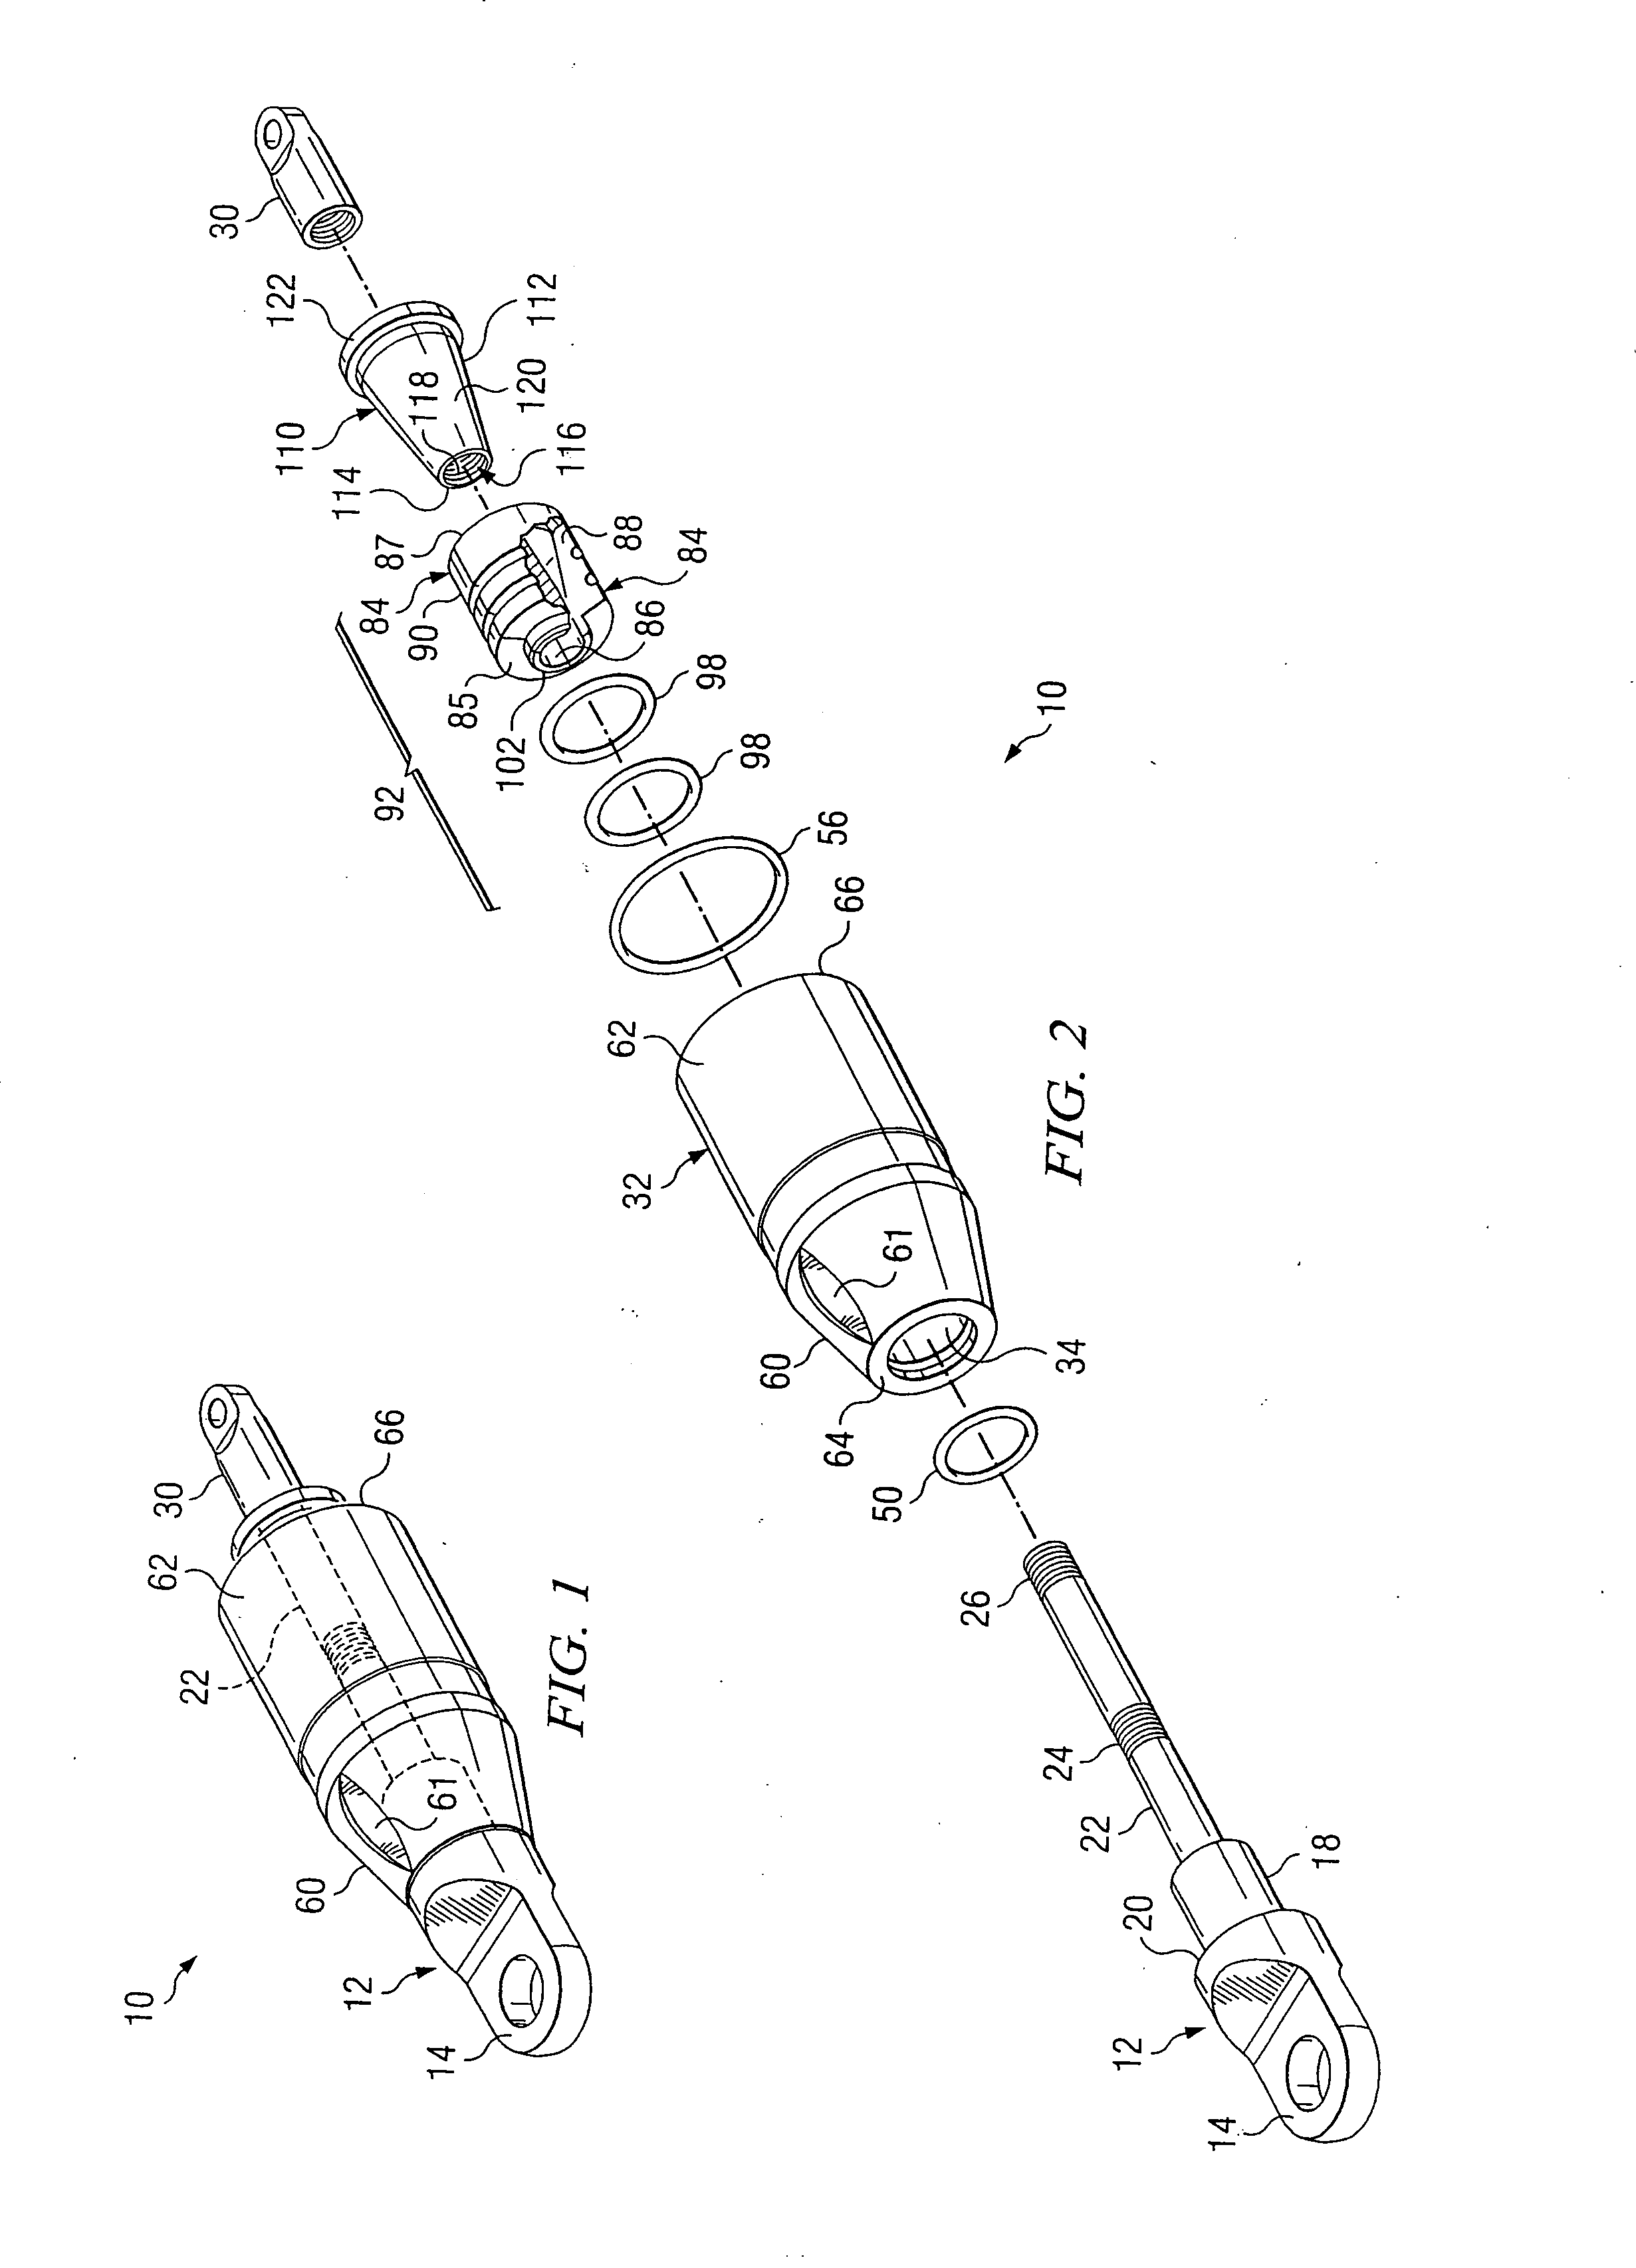 Pipe bursting and replacement apparatus and method